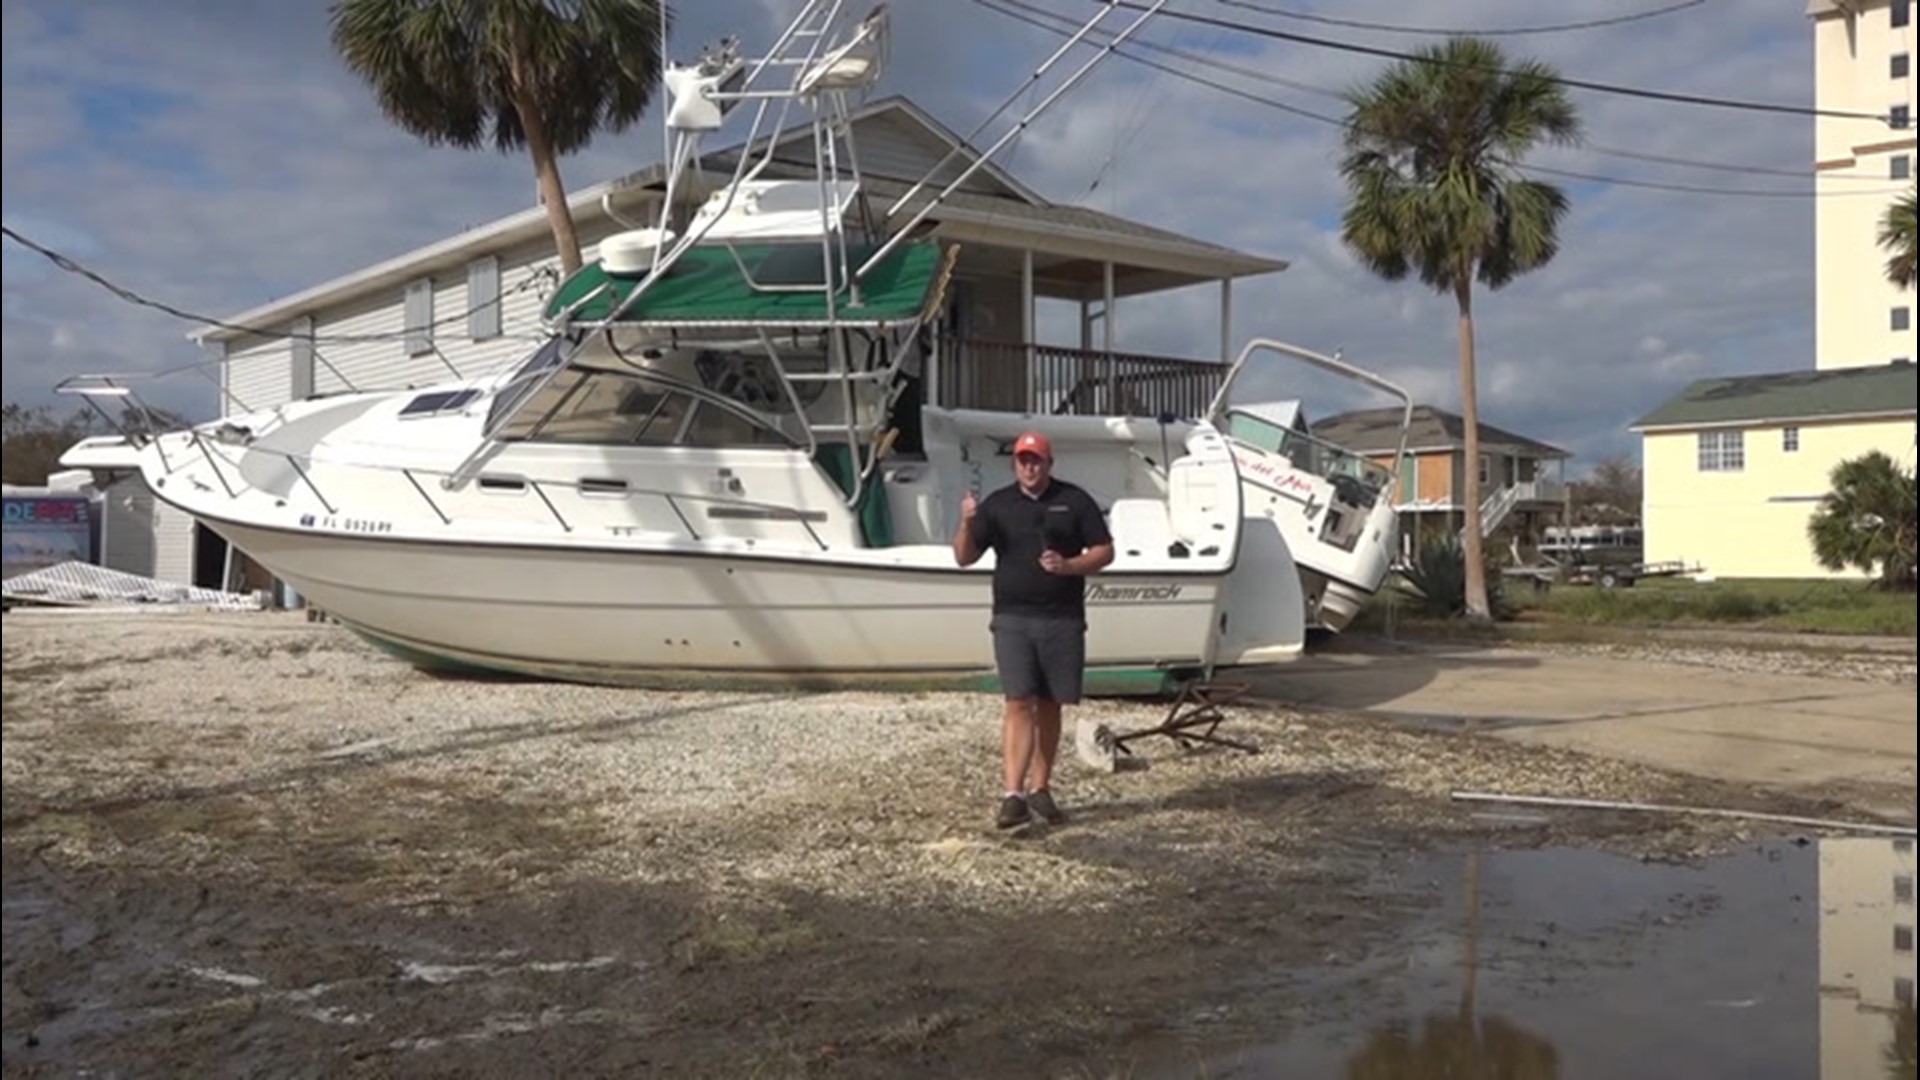 Bill Wadell was in Escambia County, Florida, on Sept. 17 reporting on the widespread damage caused by Hurricane Sally along the coast.